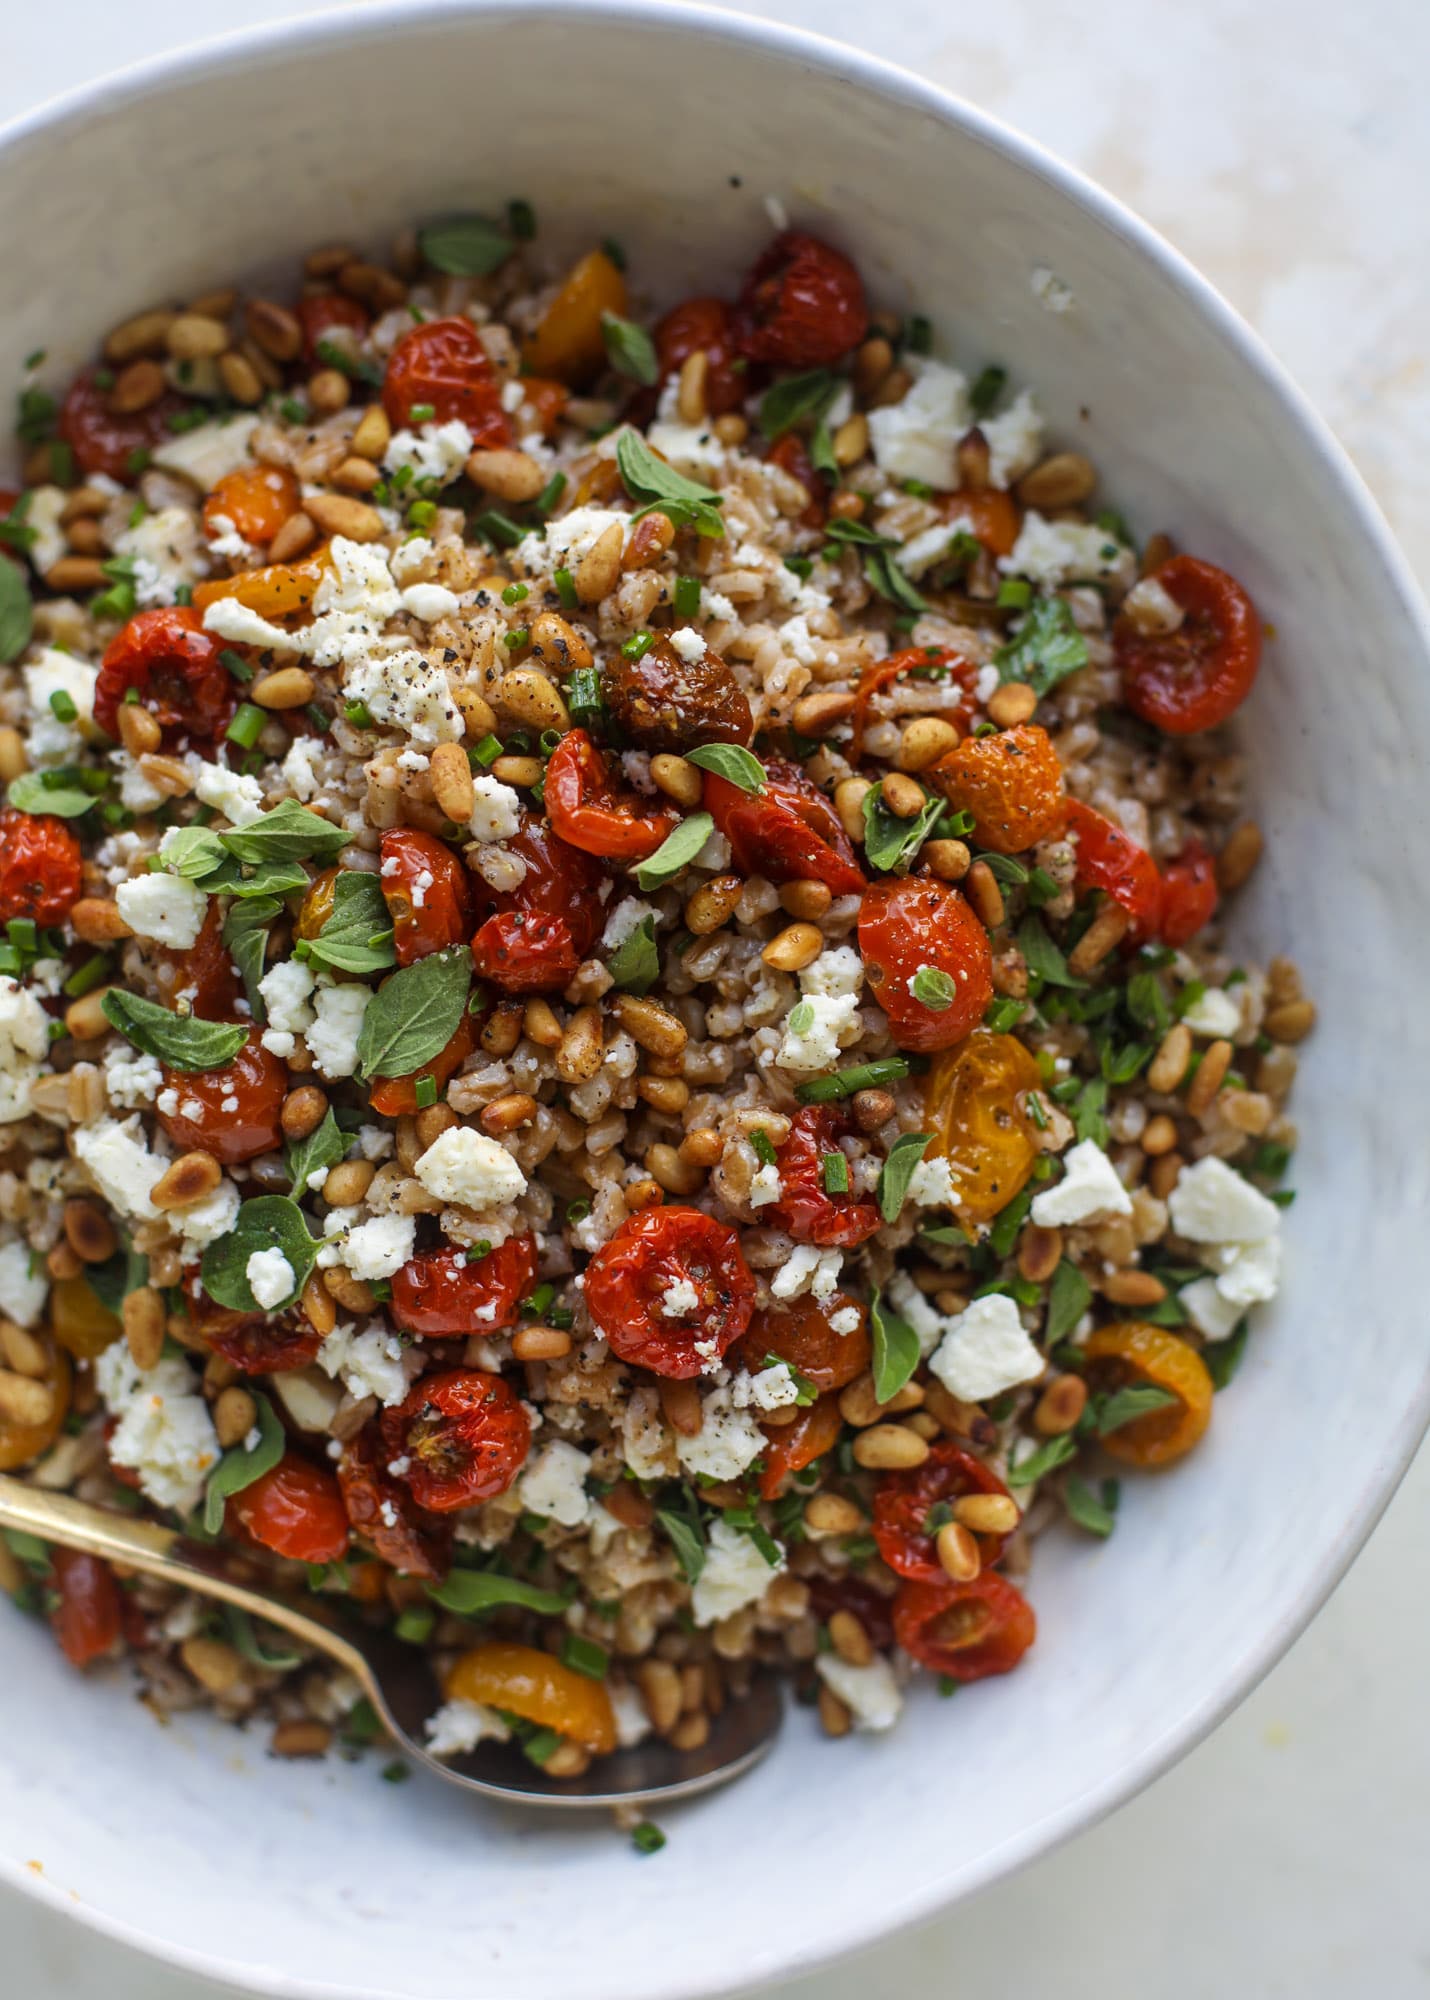 A tomato farro salad that is sweet from the slow roasted tomatoes, tangy from the feta cheese, chewy from the farro and bright from the lemon!